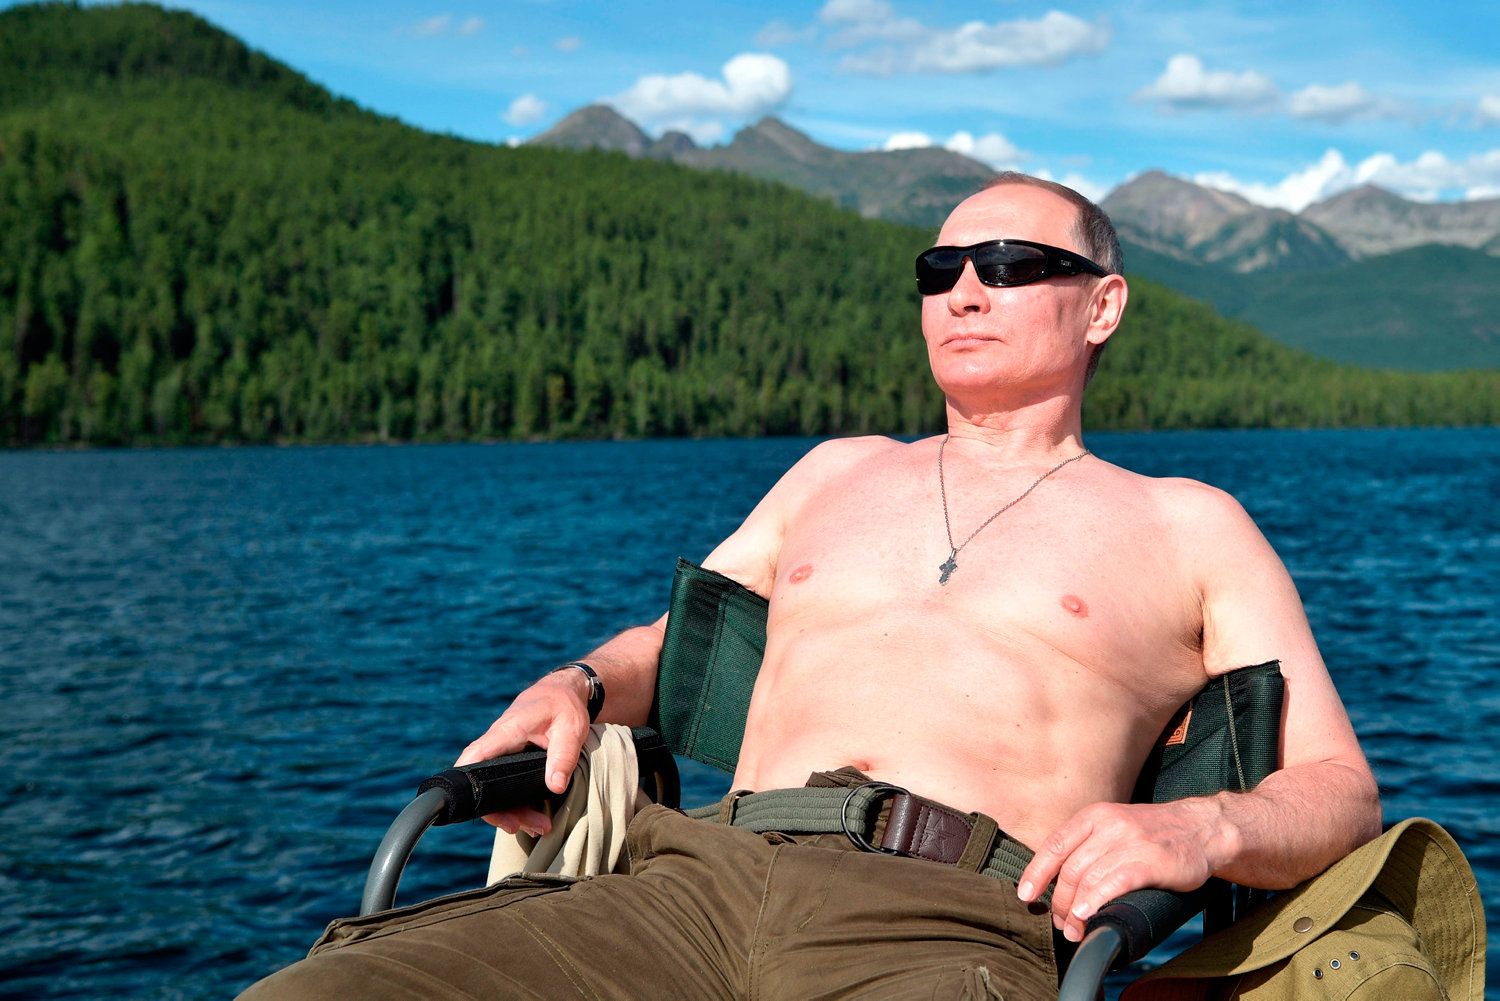 Bare-chested Vladimir Putin pictured spearfishing during break in Siberian  mountains